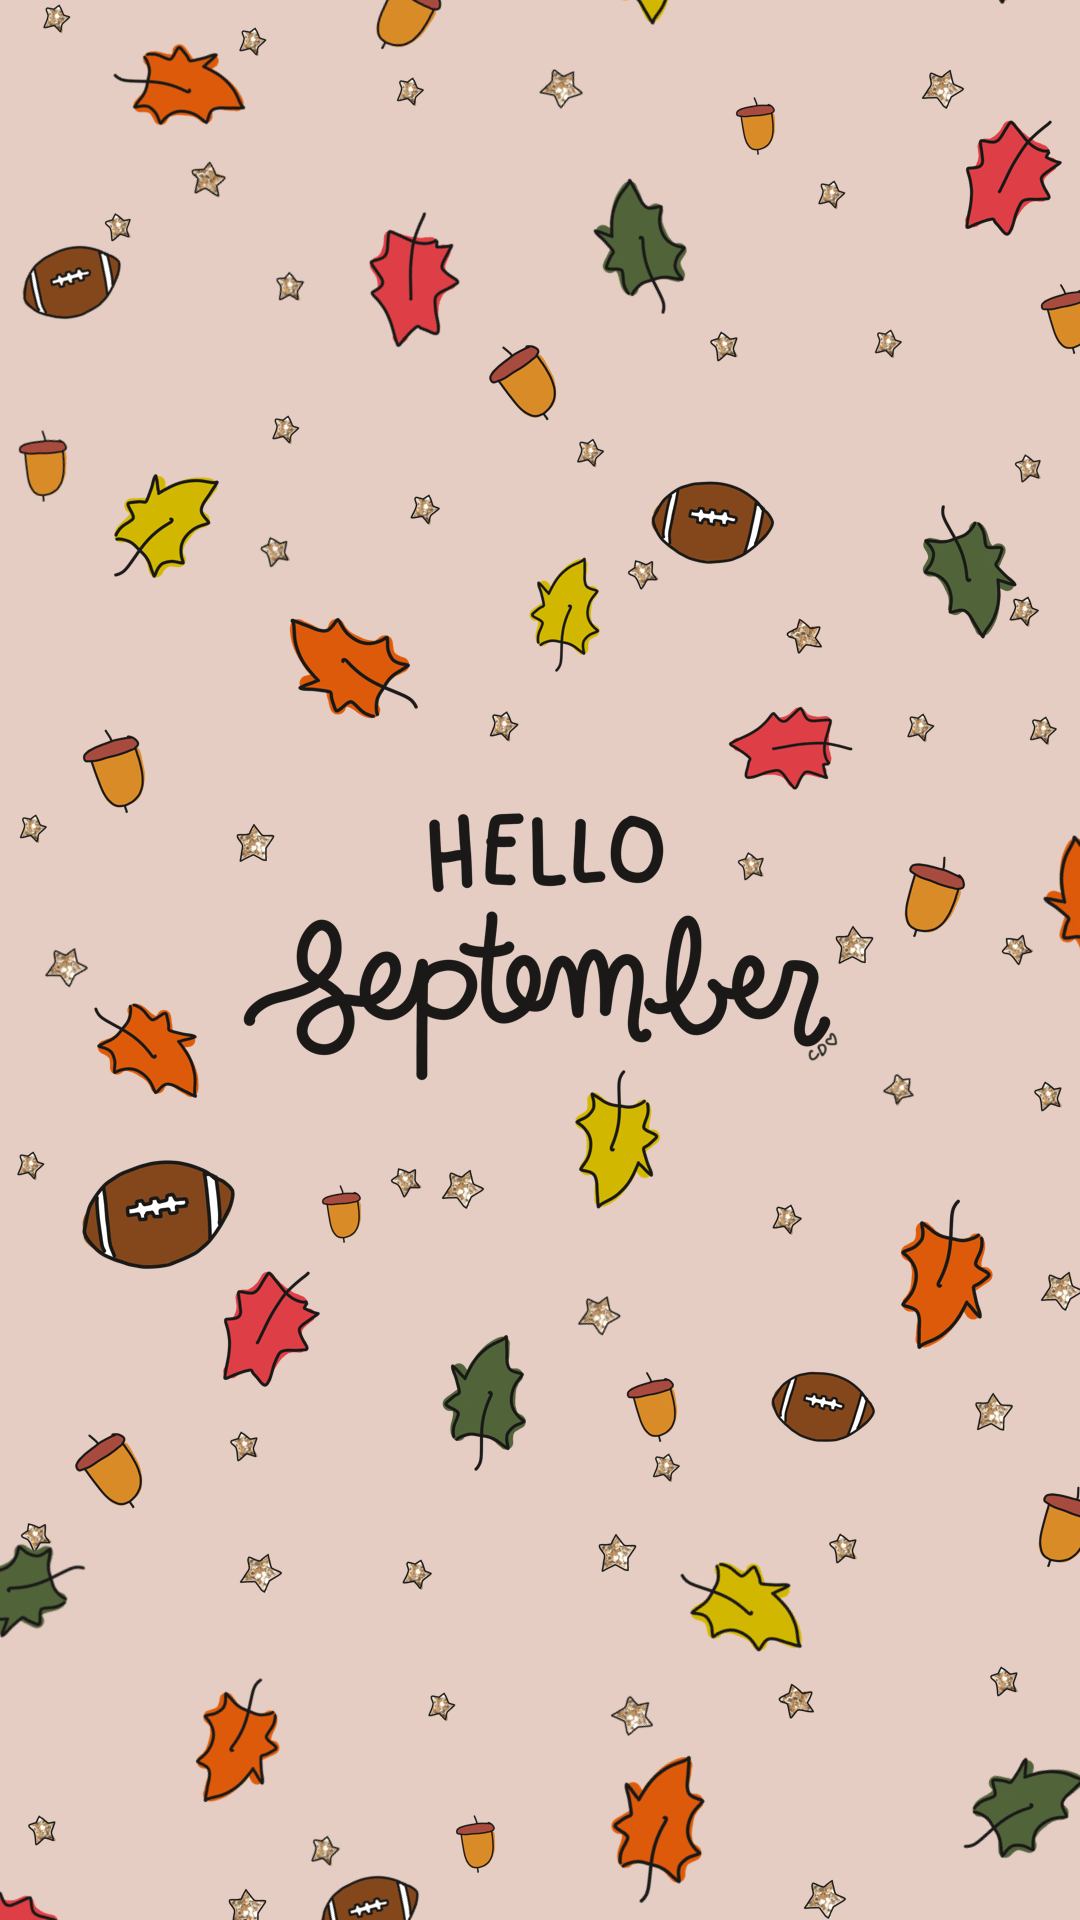 Hello September wallpaper for your phone! Get it now for free! - September